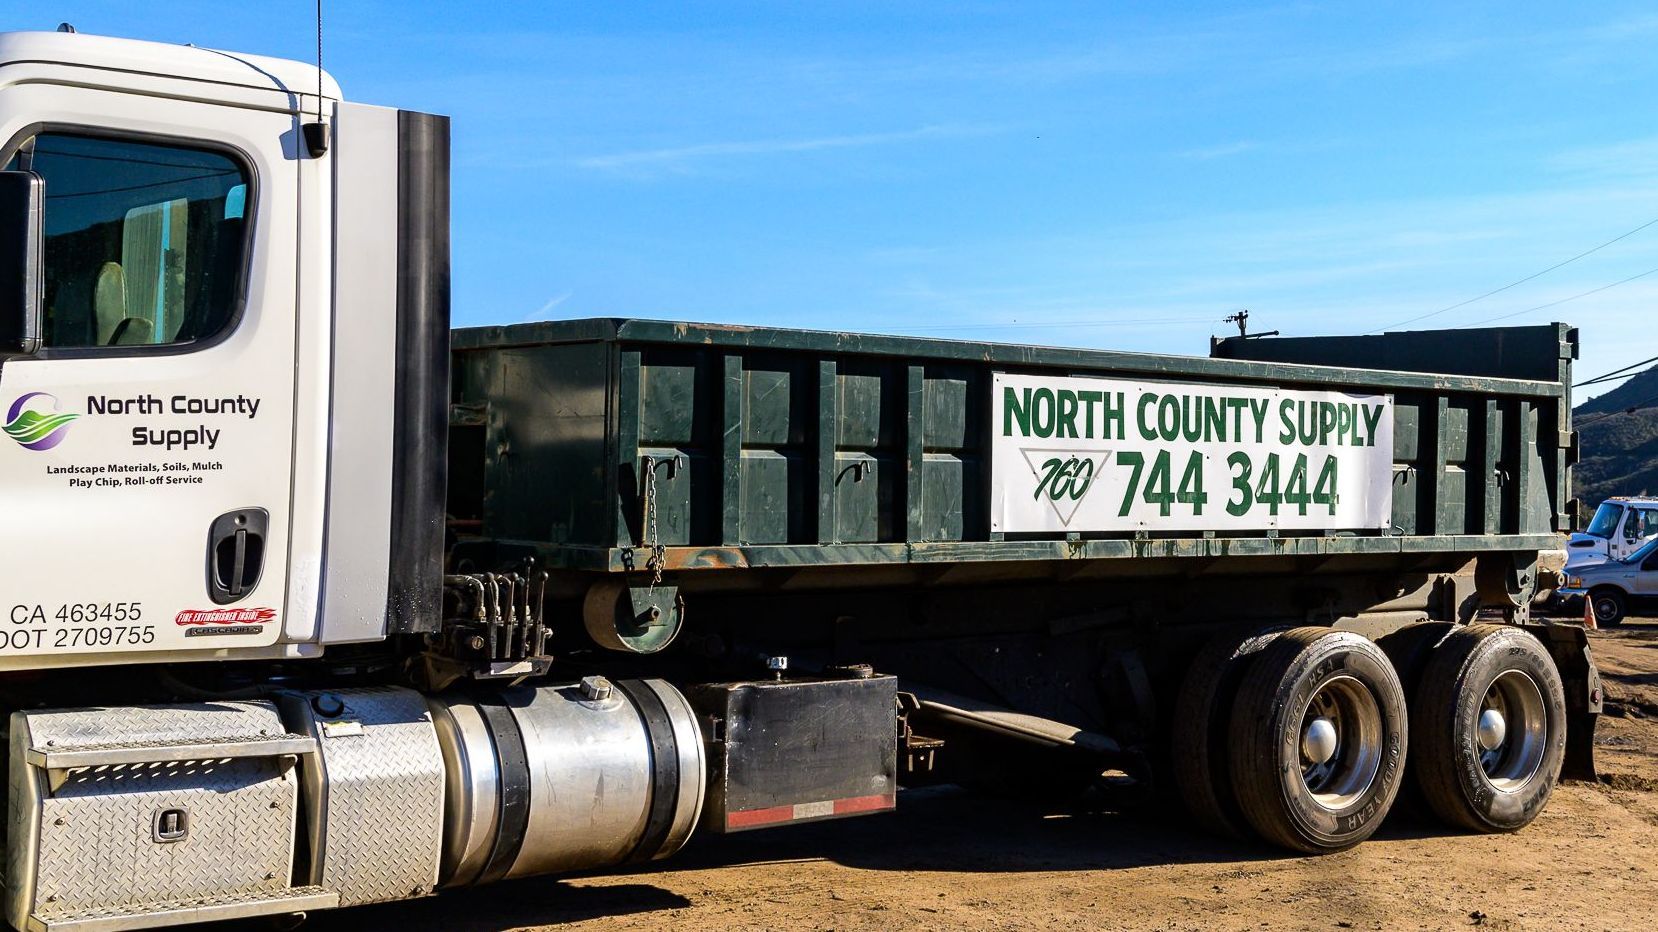 A north county dump truck is parked in a dirt lot